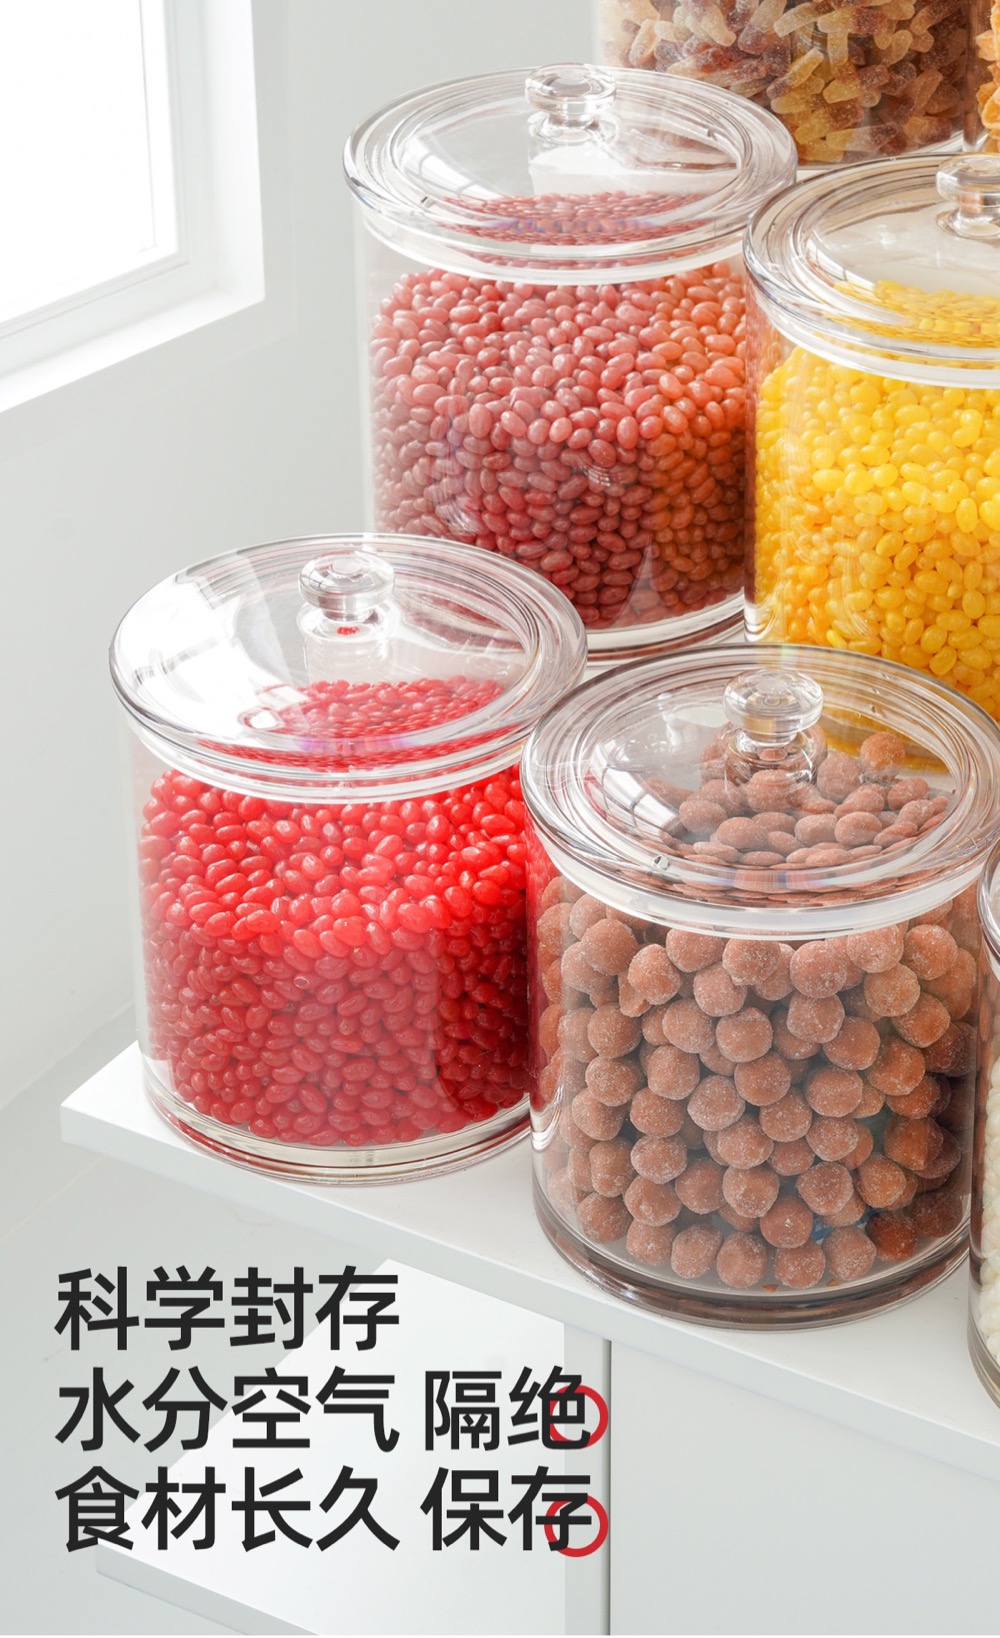 ECOBOX MY-04 Cereal Food Container Candy Nuts Box Scoop Bin Storage Bins Candy Storage Container Bulk Food Bin For Sale